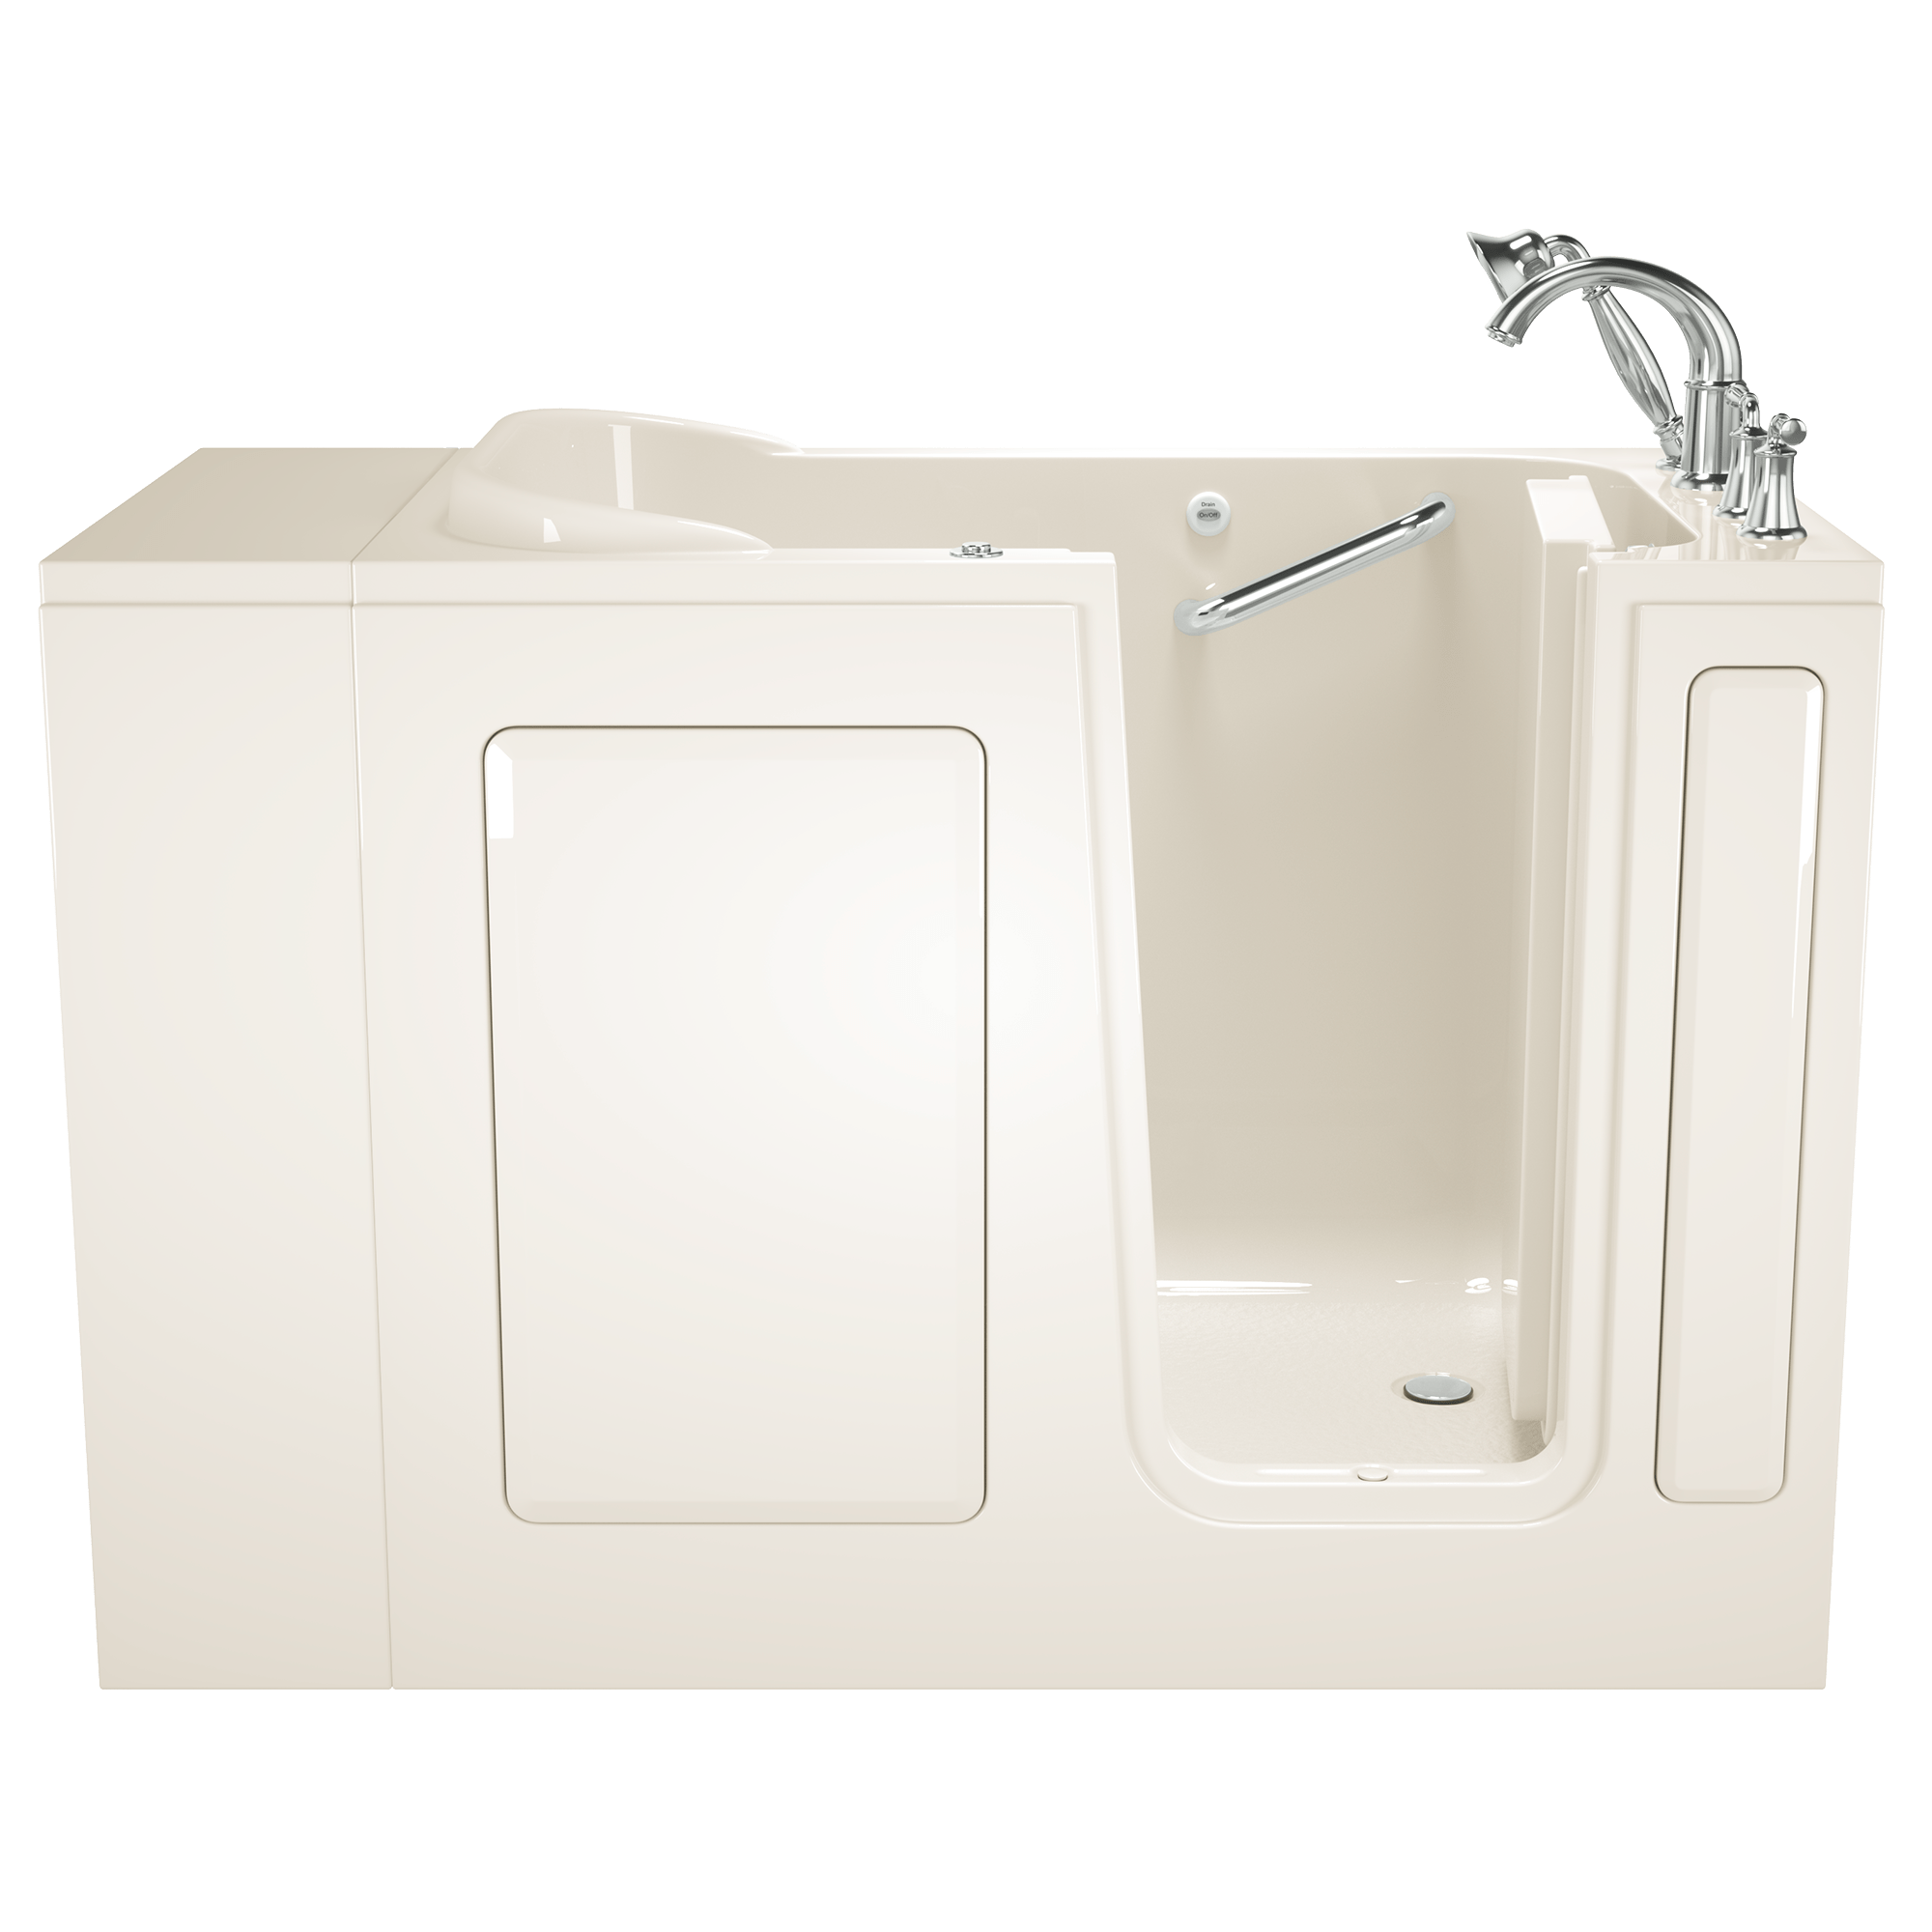 Gelcoat Value Series 28x48 inch Walk in Bathtub with Whirlpool System  Right Hand Door and Drain WIB LINEN